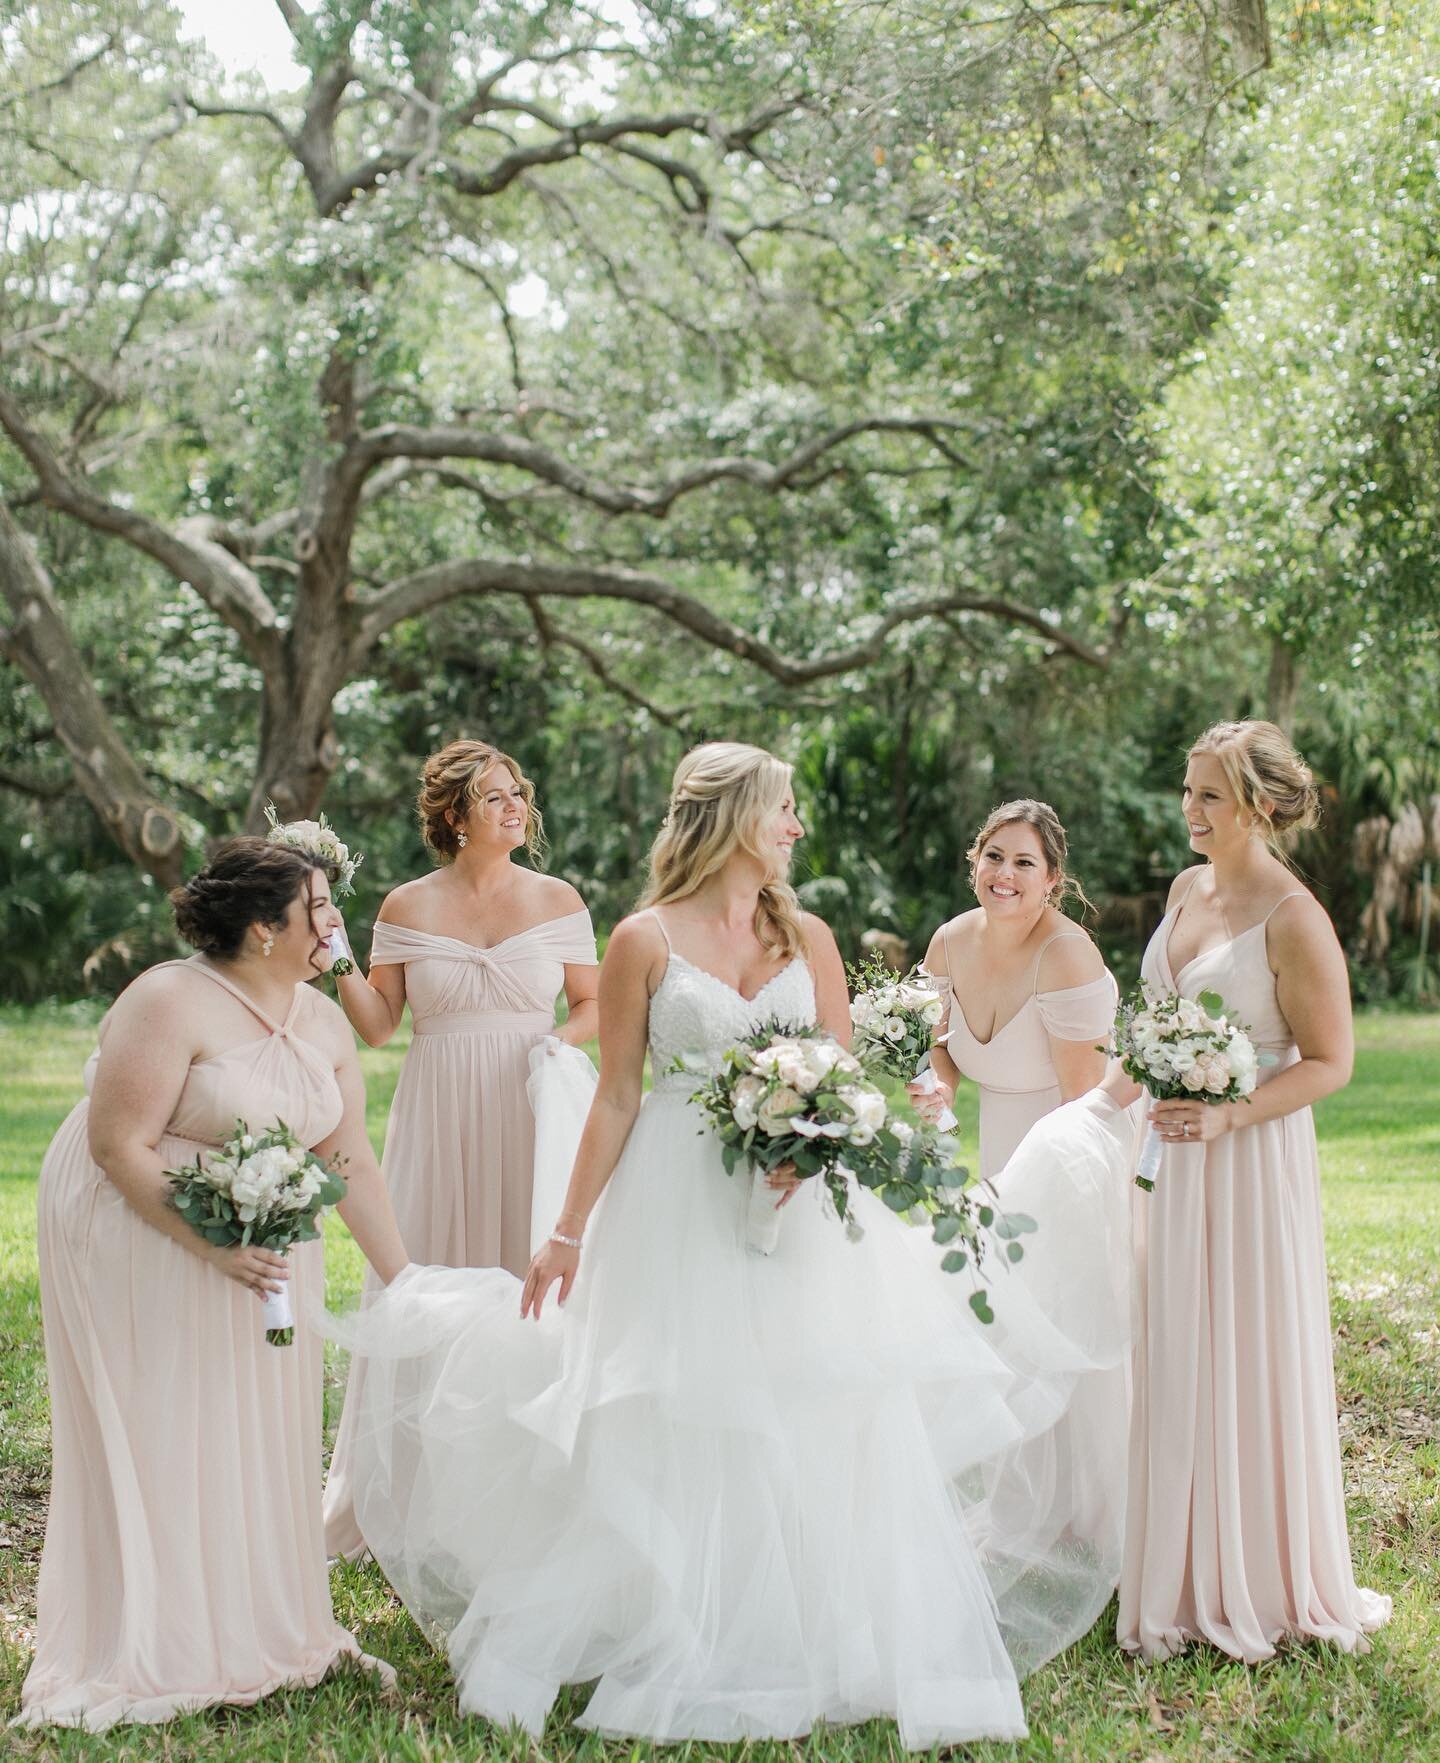 I&rsquo;ve been waiting to share some of these beautiful images 🥰 what a lovely bridal party Andrea has!